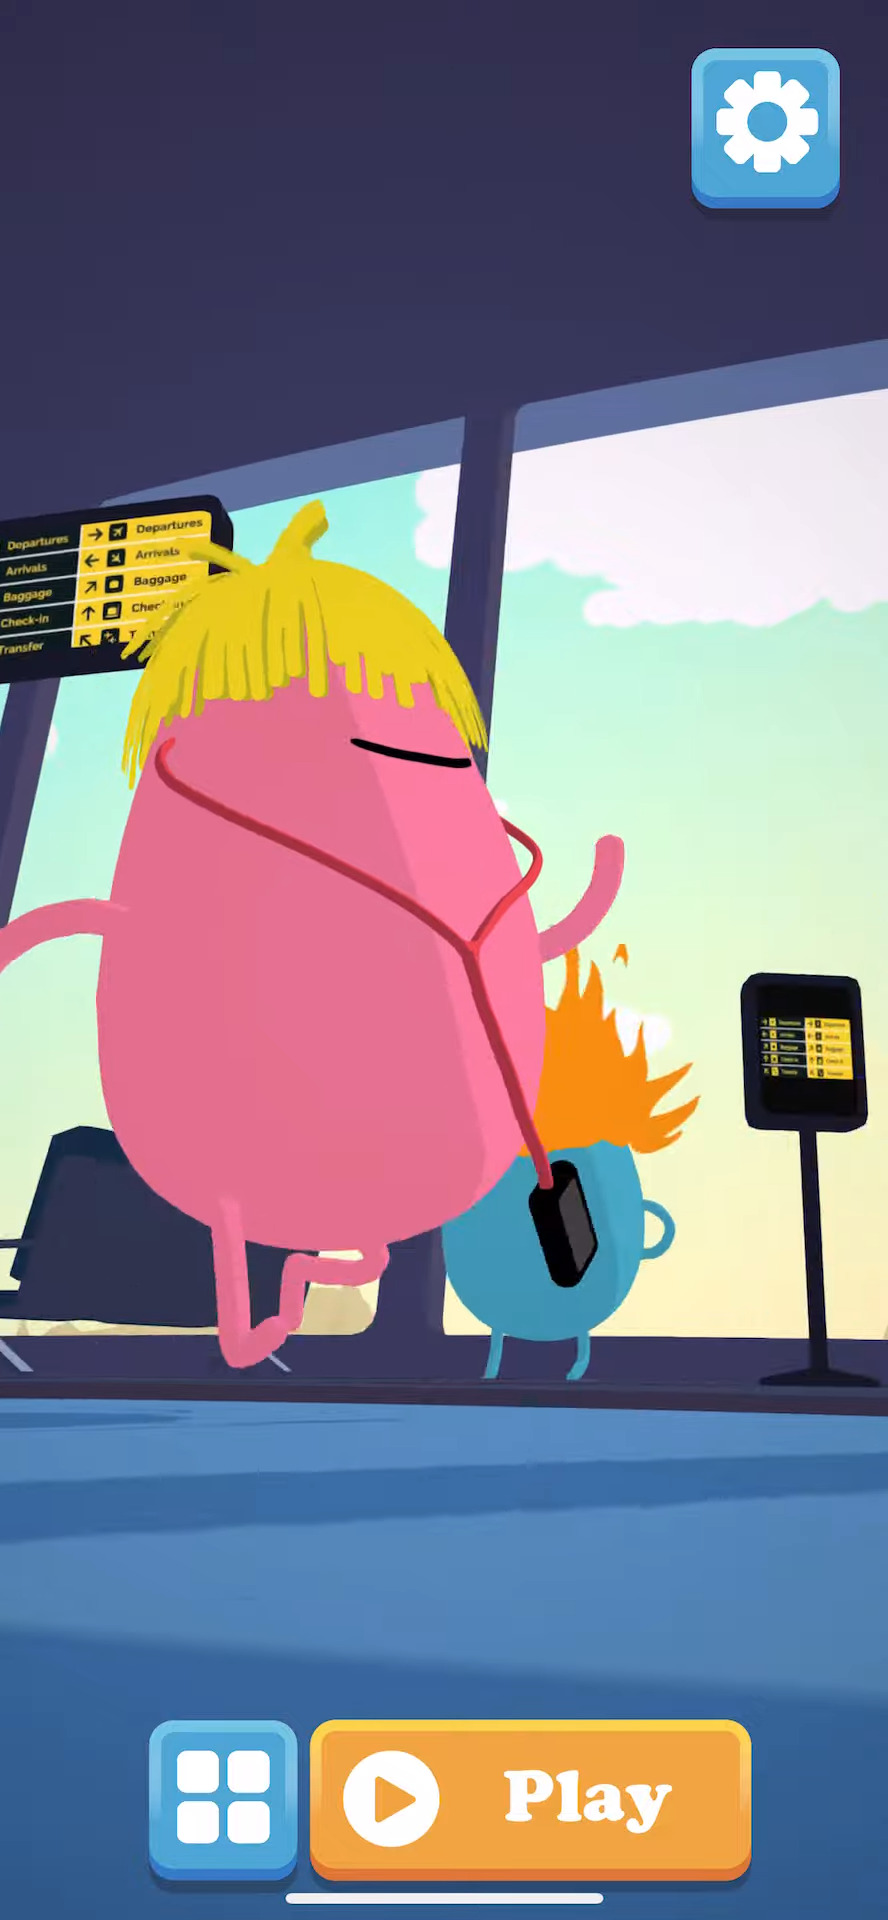 Scarica Dumb Ways to Die: Dumb Choices gratis per Android.